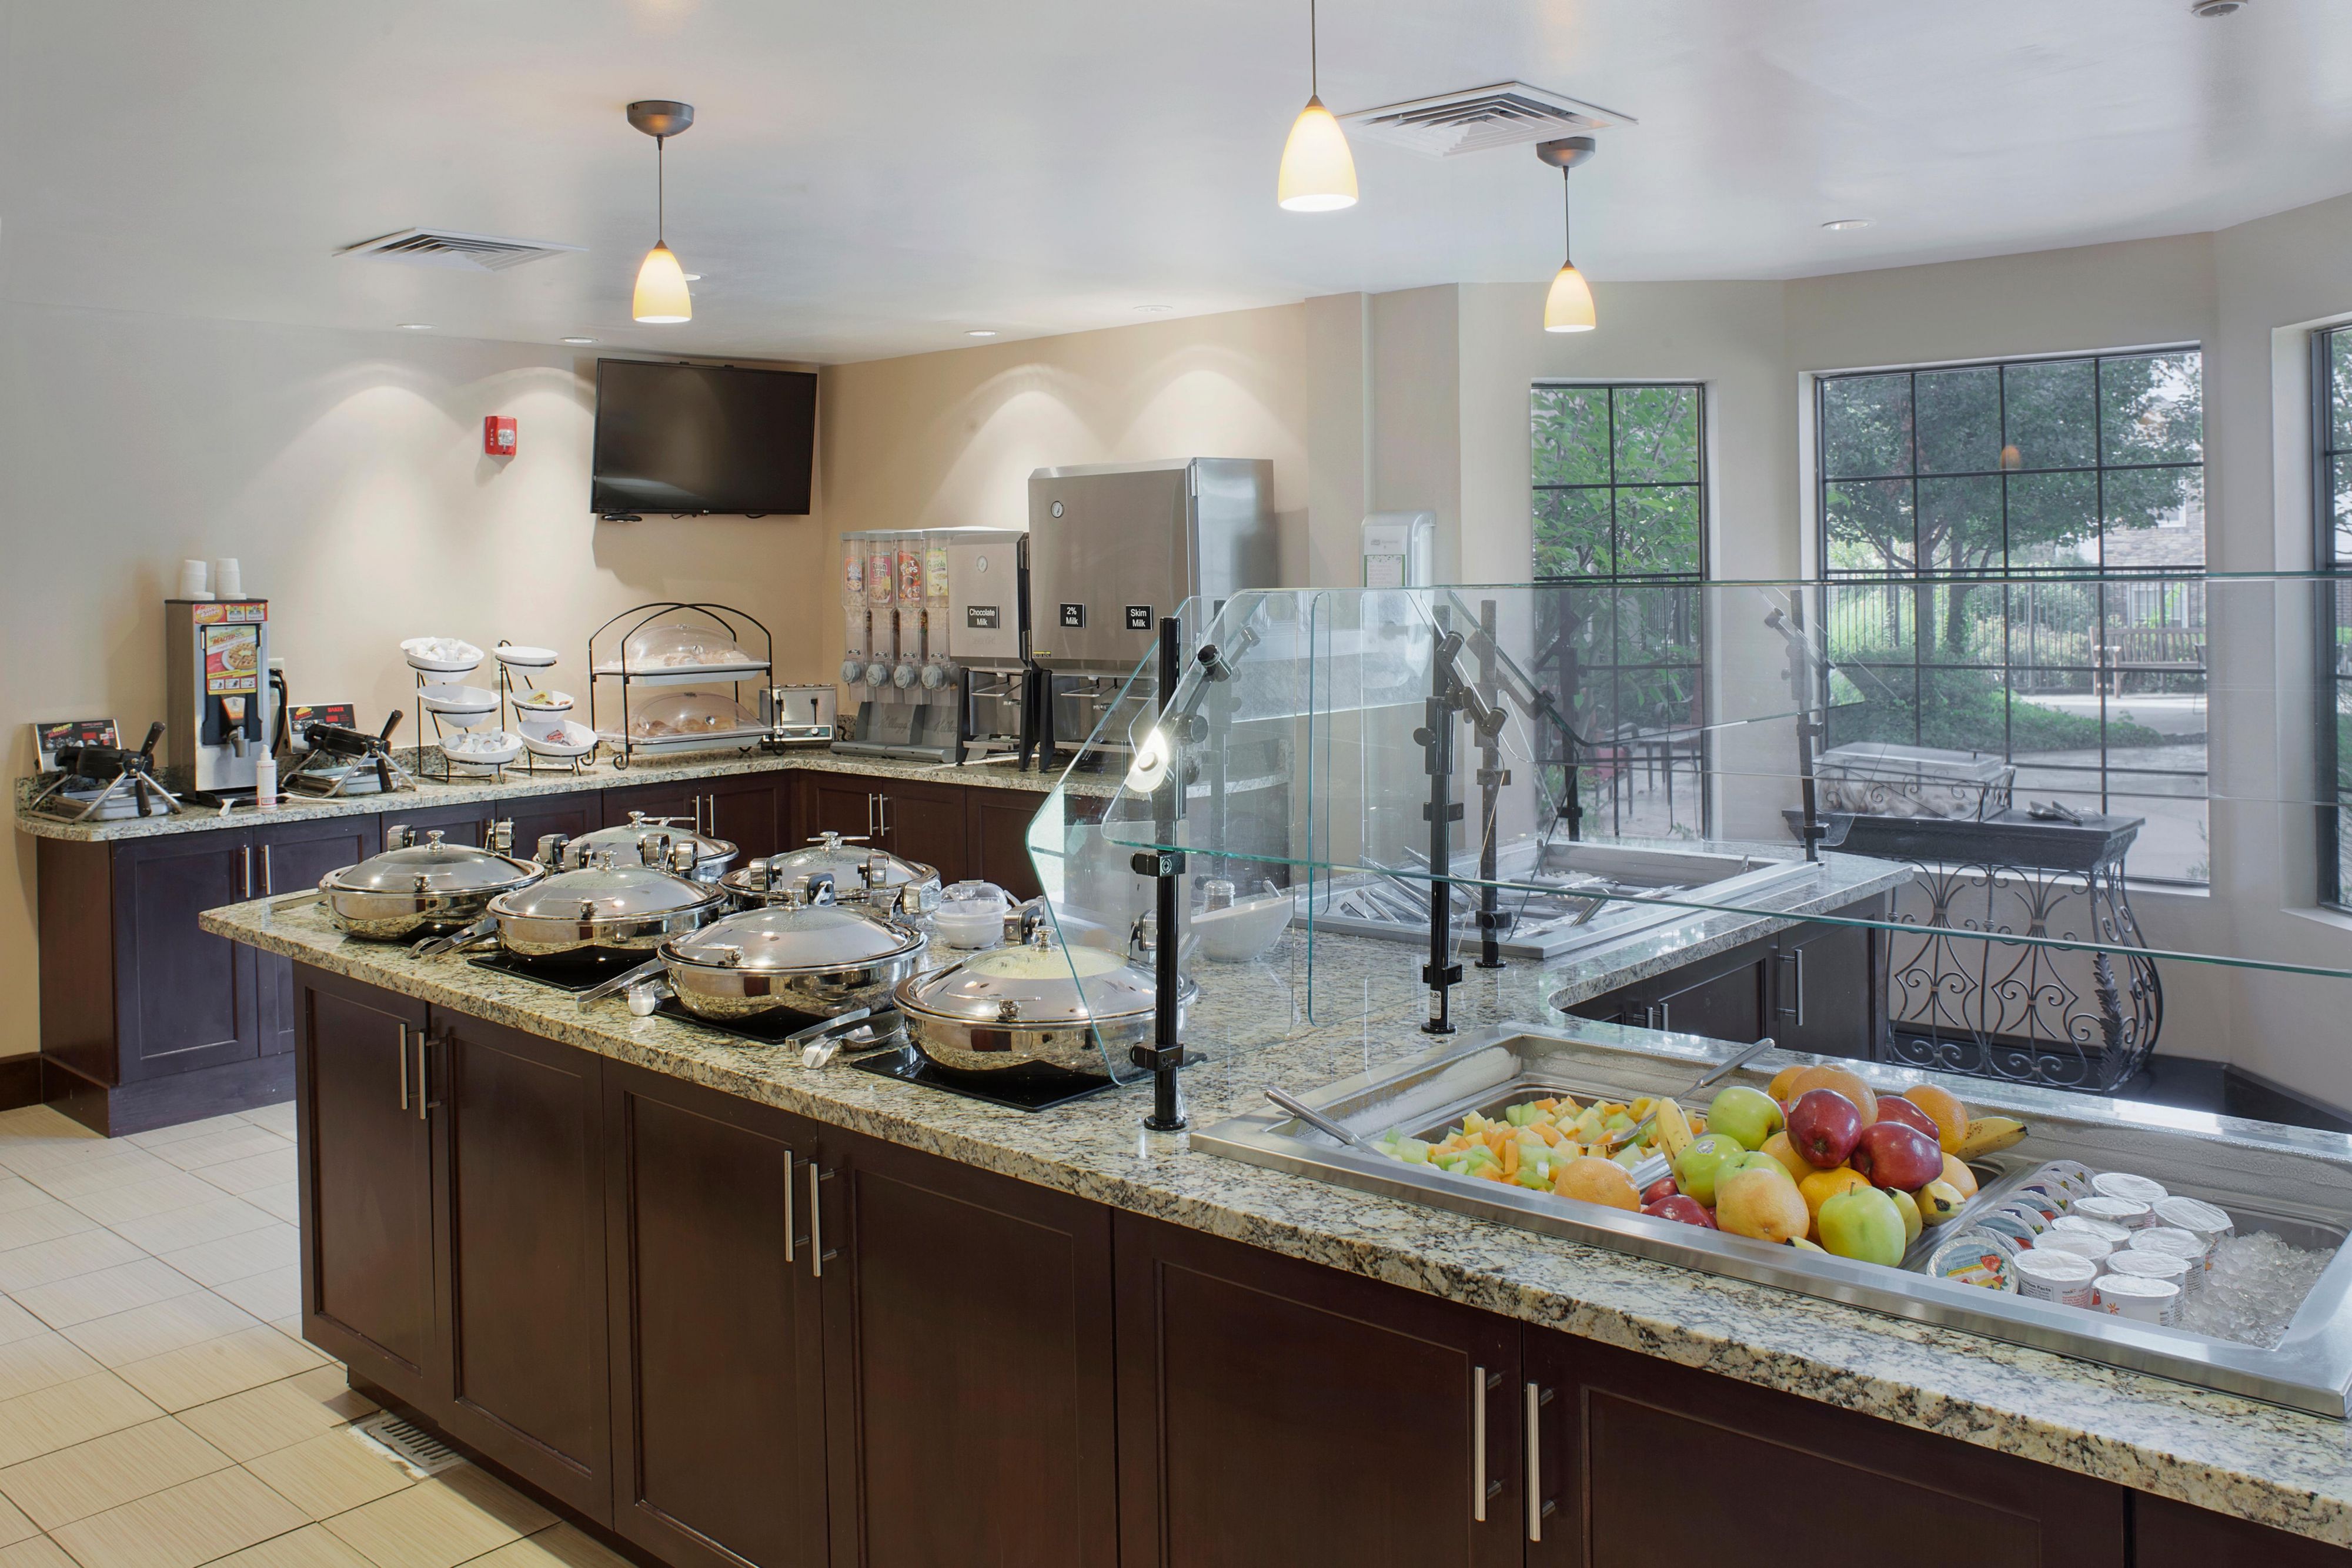 Wake up to a complimentary breakfast buffet every day during your stay. Featuring eggs, bacon, Belgian waffles, fresh fruit, juices and an assortment of other hot and cold items the breakfast buffet is sure to get your day off to a great start.